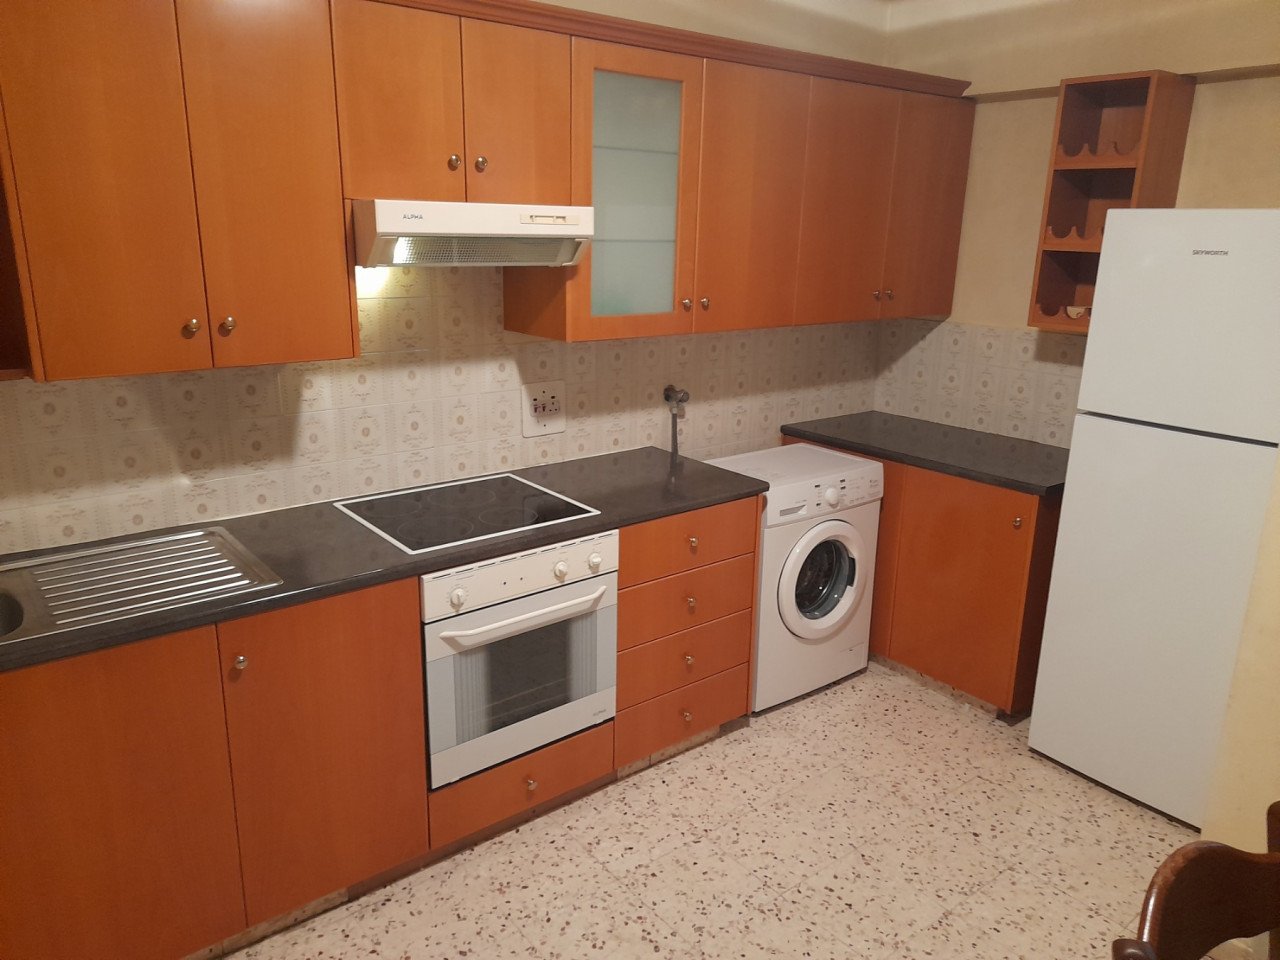 For Sale: Apartment (Flat) in Acropoli, Nicosia for Rent | Key Realtor Cyprus